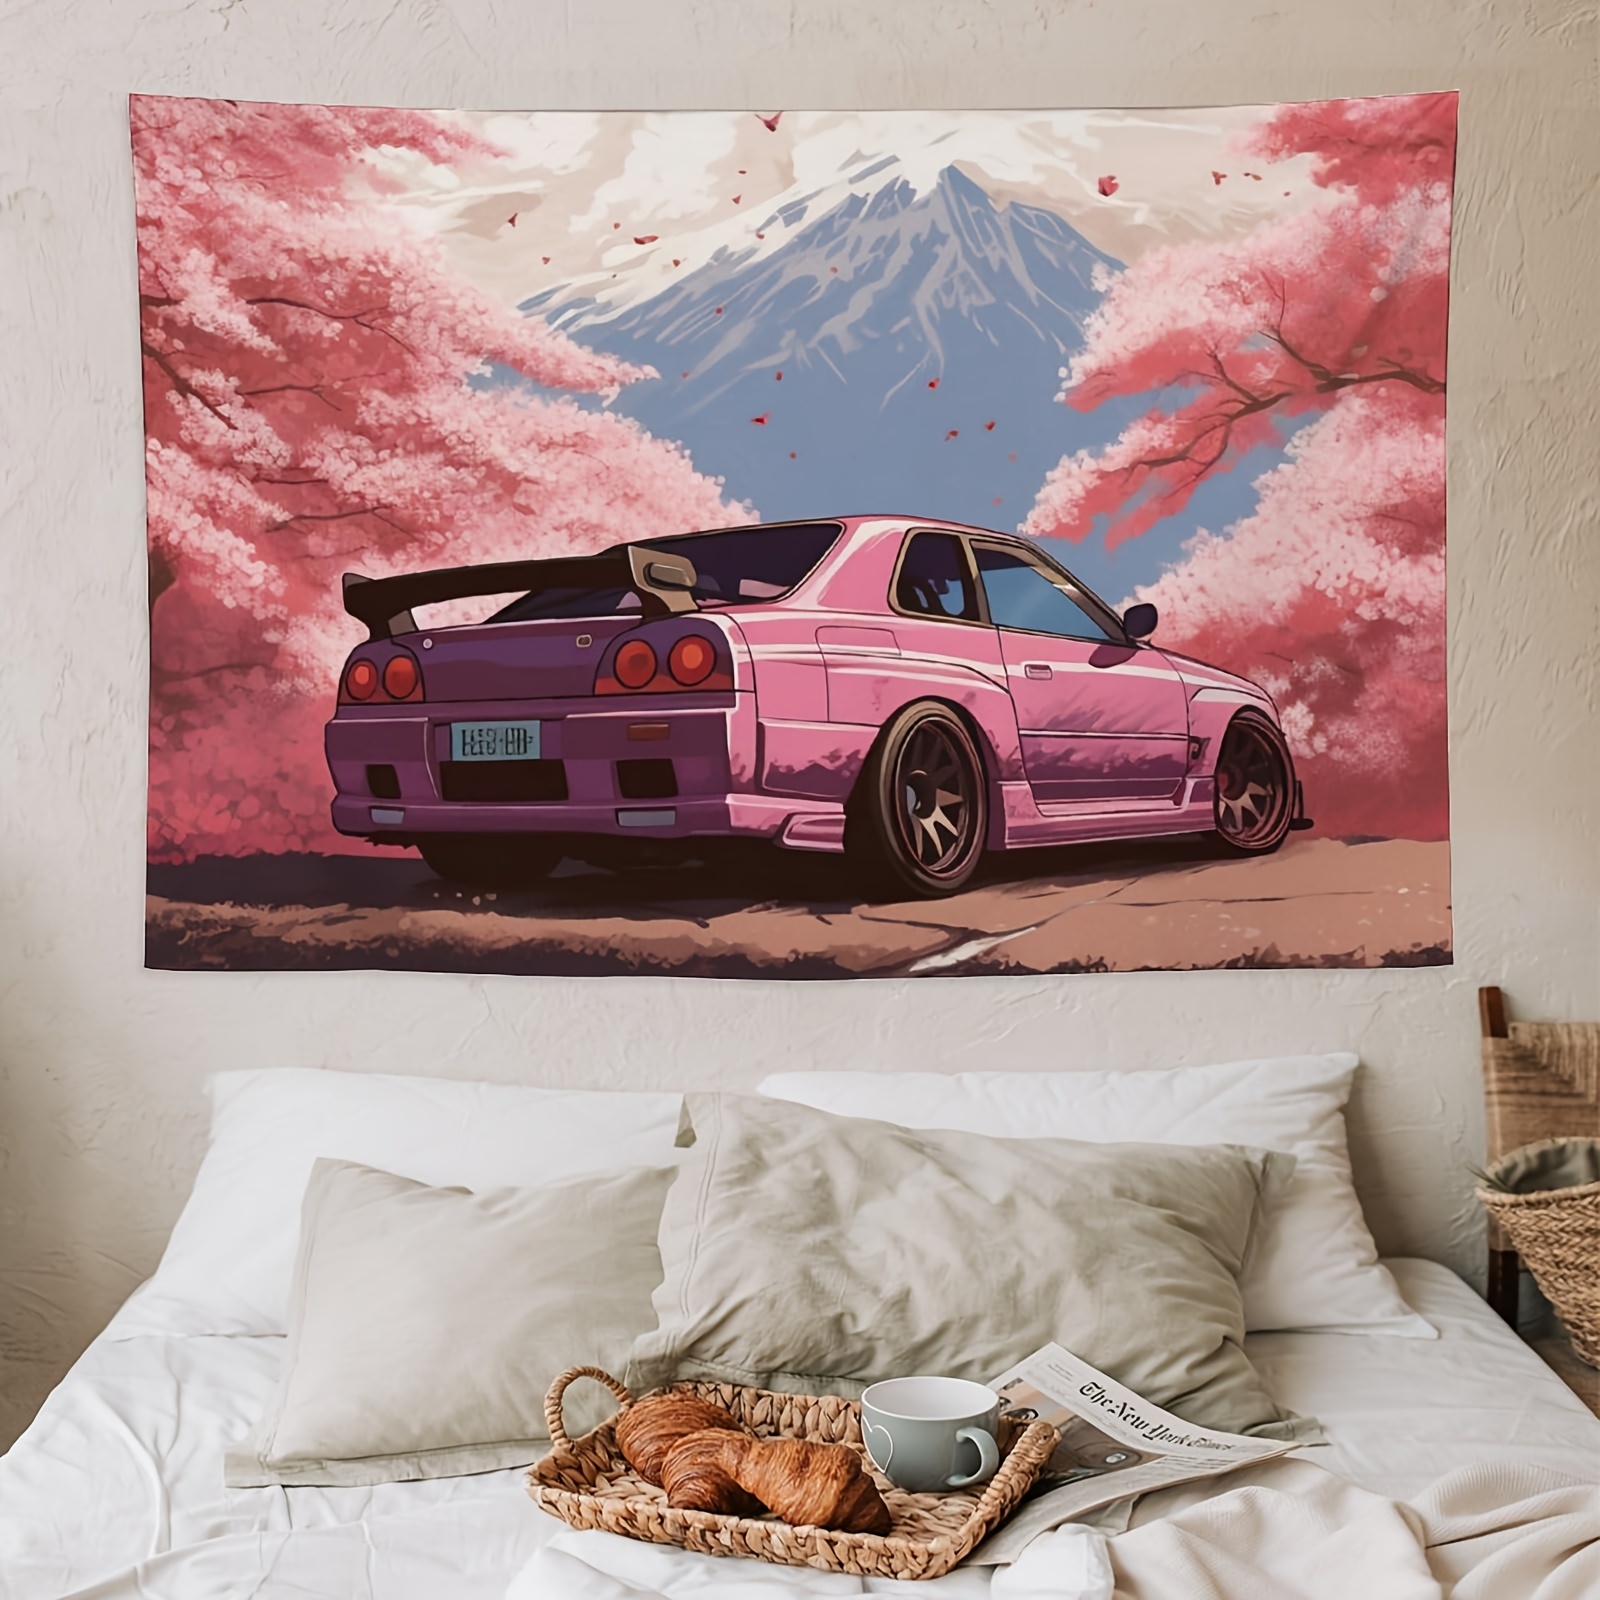 

Anime-inspired Jdm Car R34 With Sakura And Mount Fuji Wall Tapestry, Japanese Art Knit Polyester Fabric Hanging Decor For Bedroom, Living Room, Dorm - Indoor Use, No Electricity Required